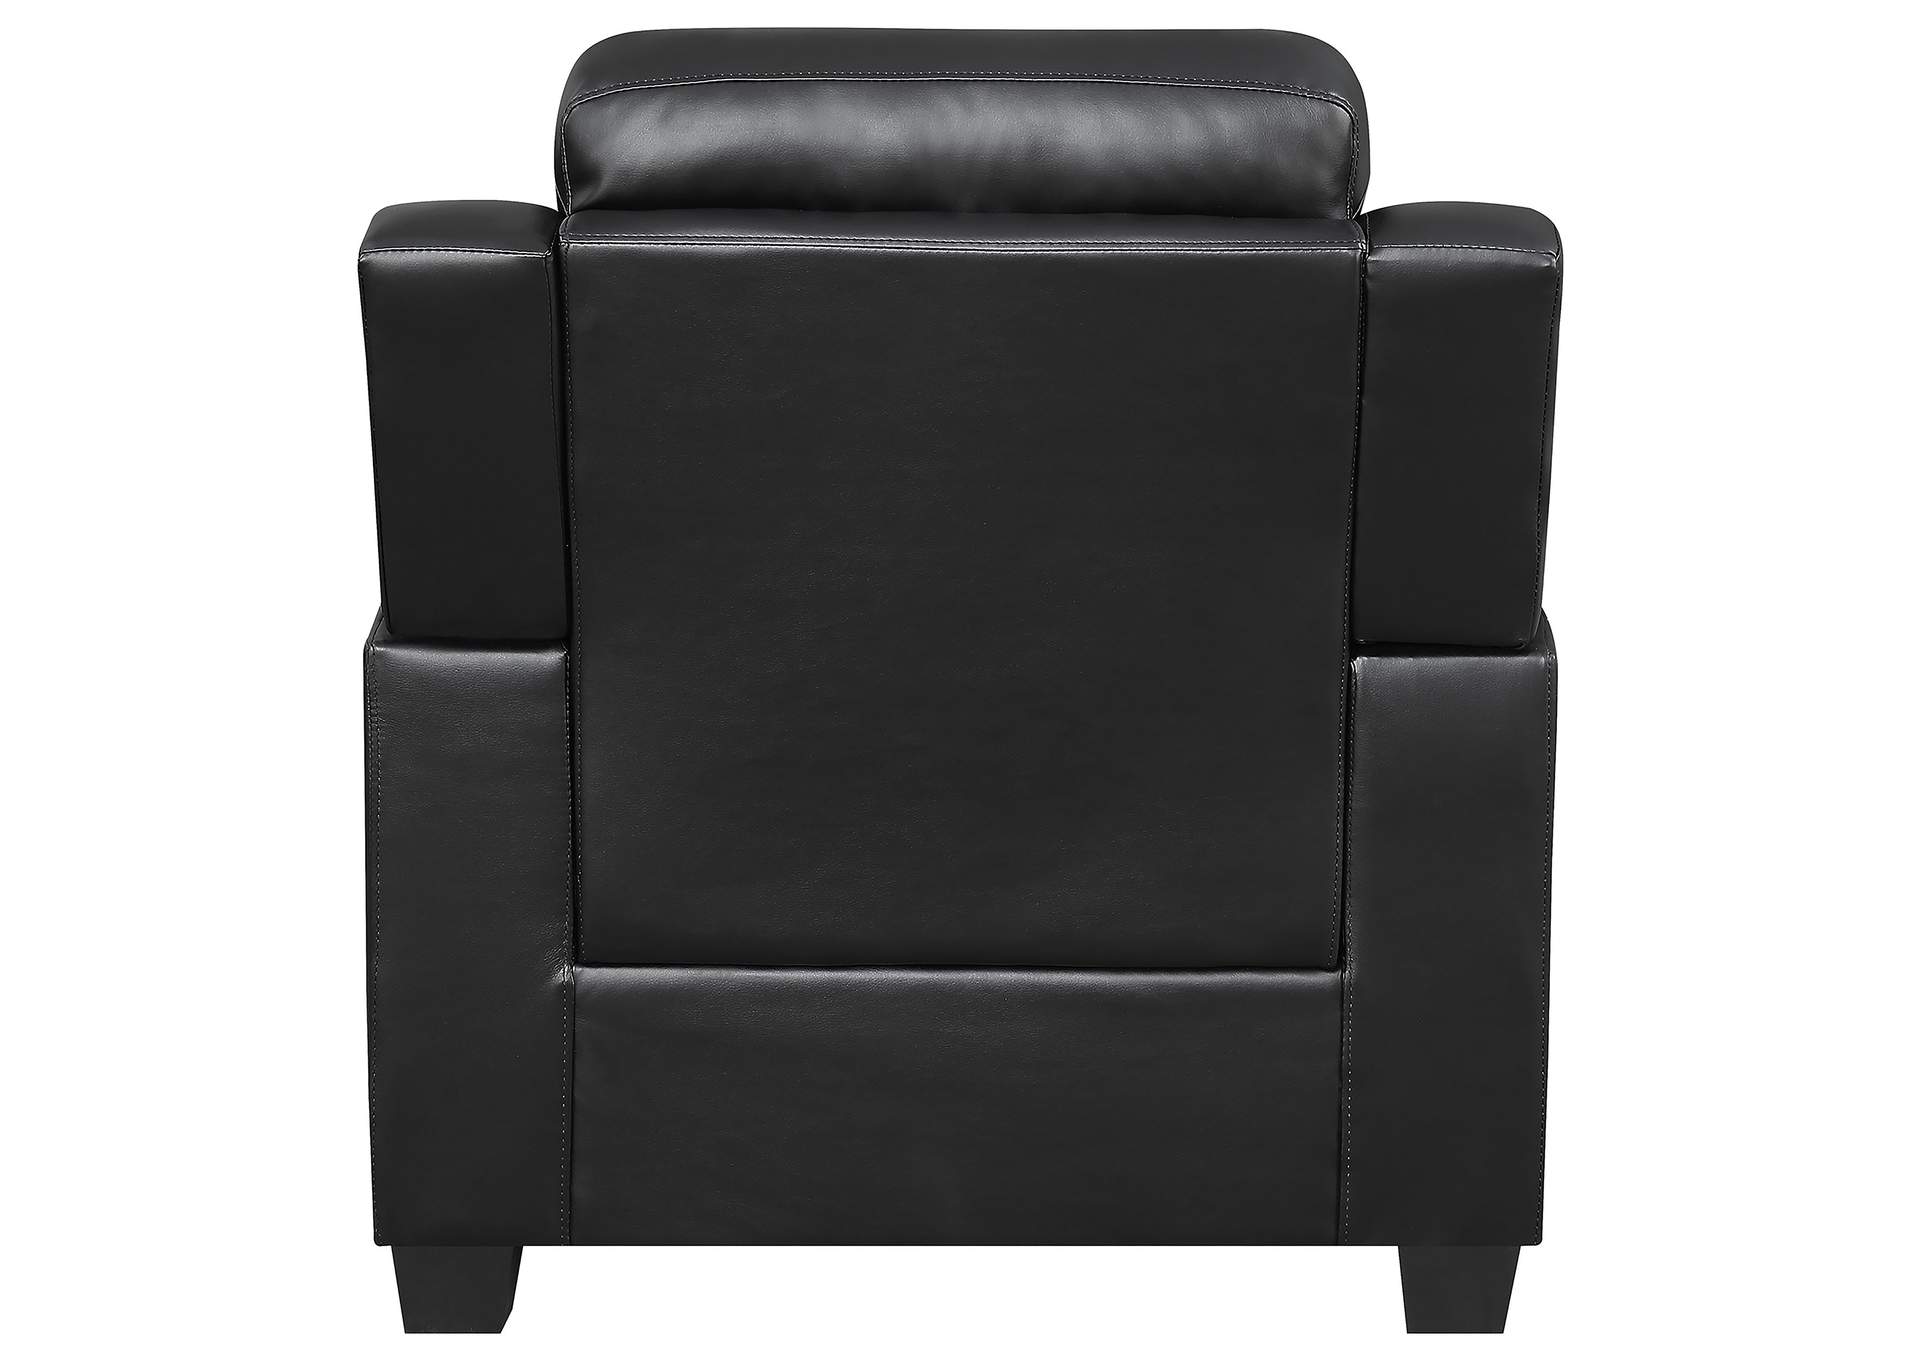 Finley Tufted Upholstered Chair Black,Coaster Furniture